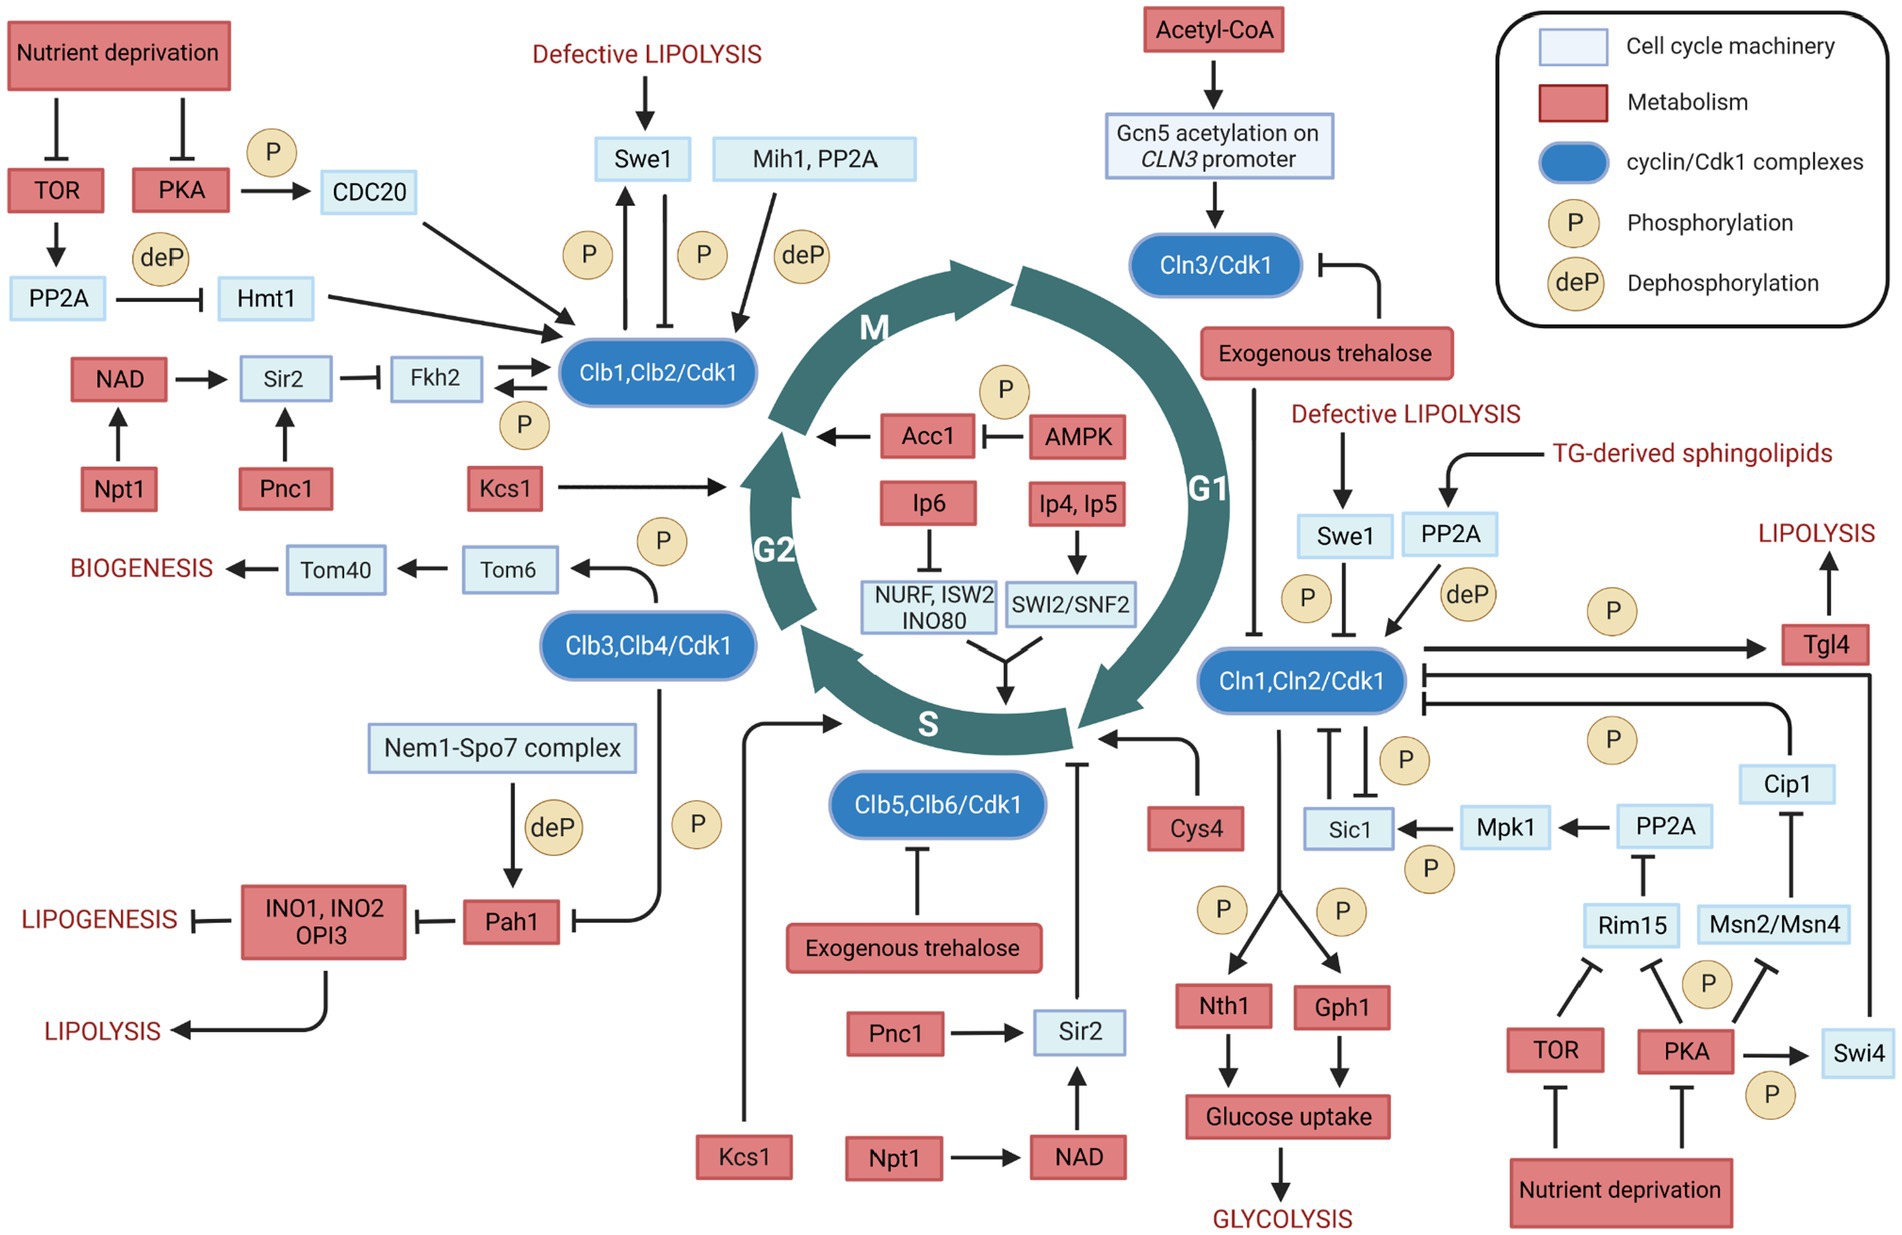 Life-cycle assessment of yeast-based single-cell protein